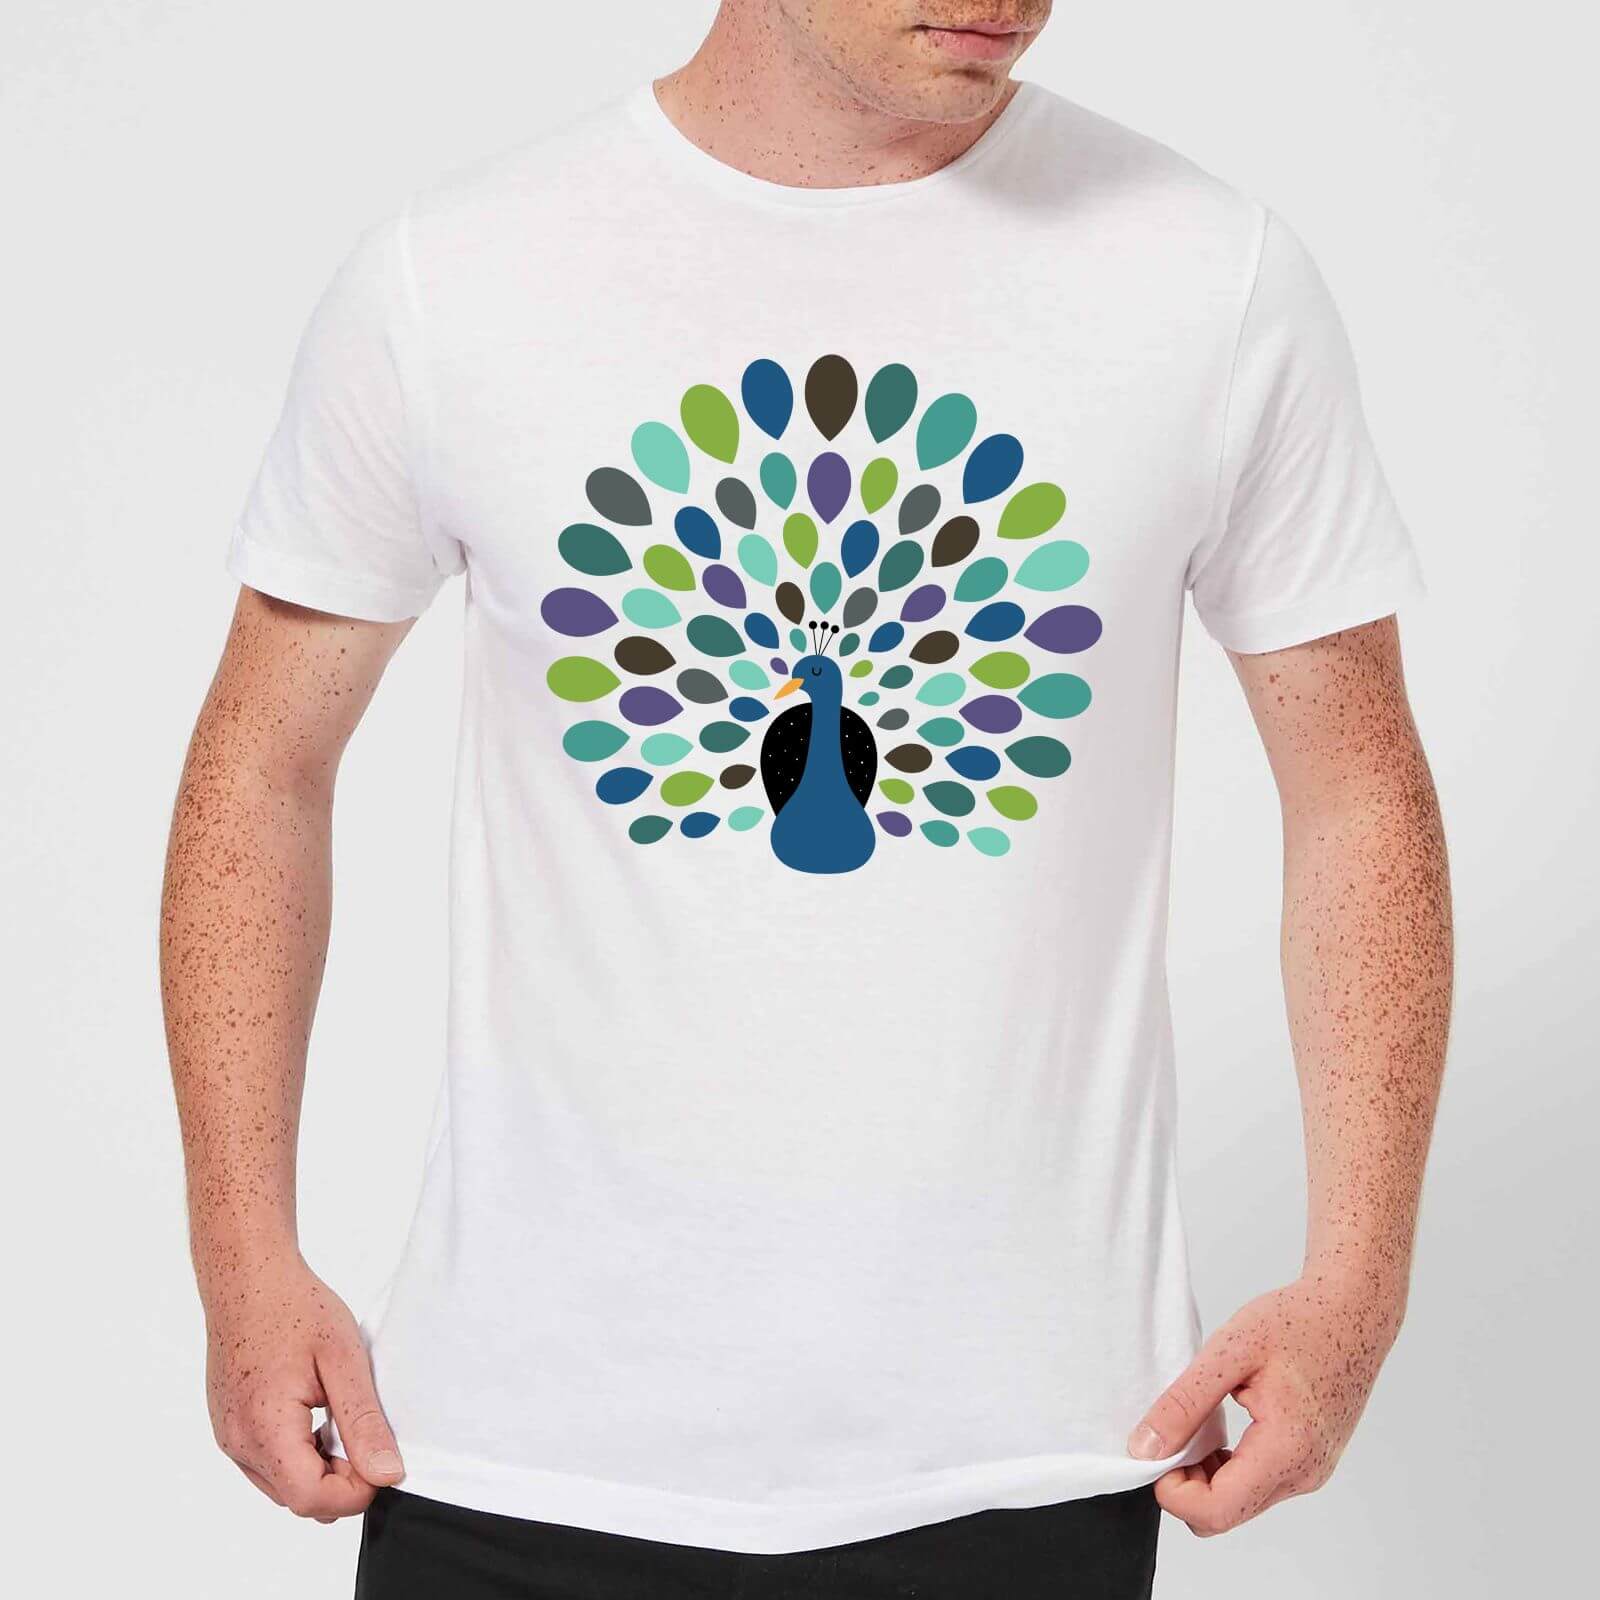 Andy Westface Peacock Time Men's T-Shirt - White - XS - White